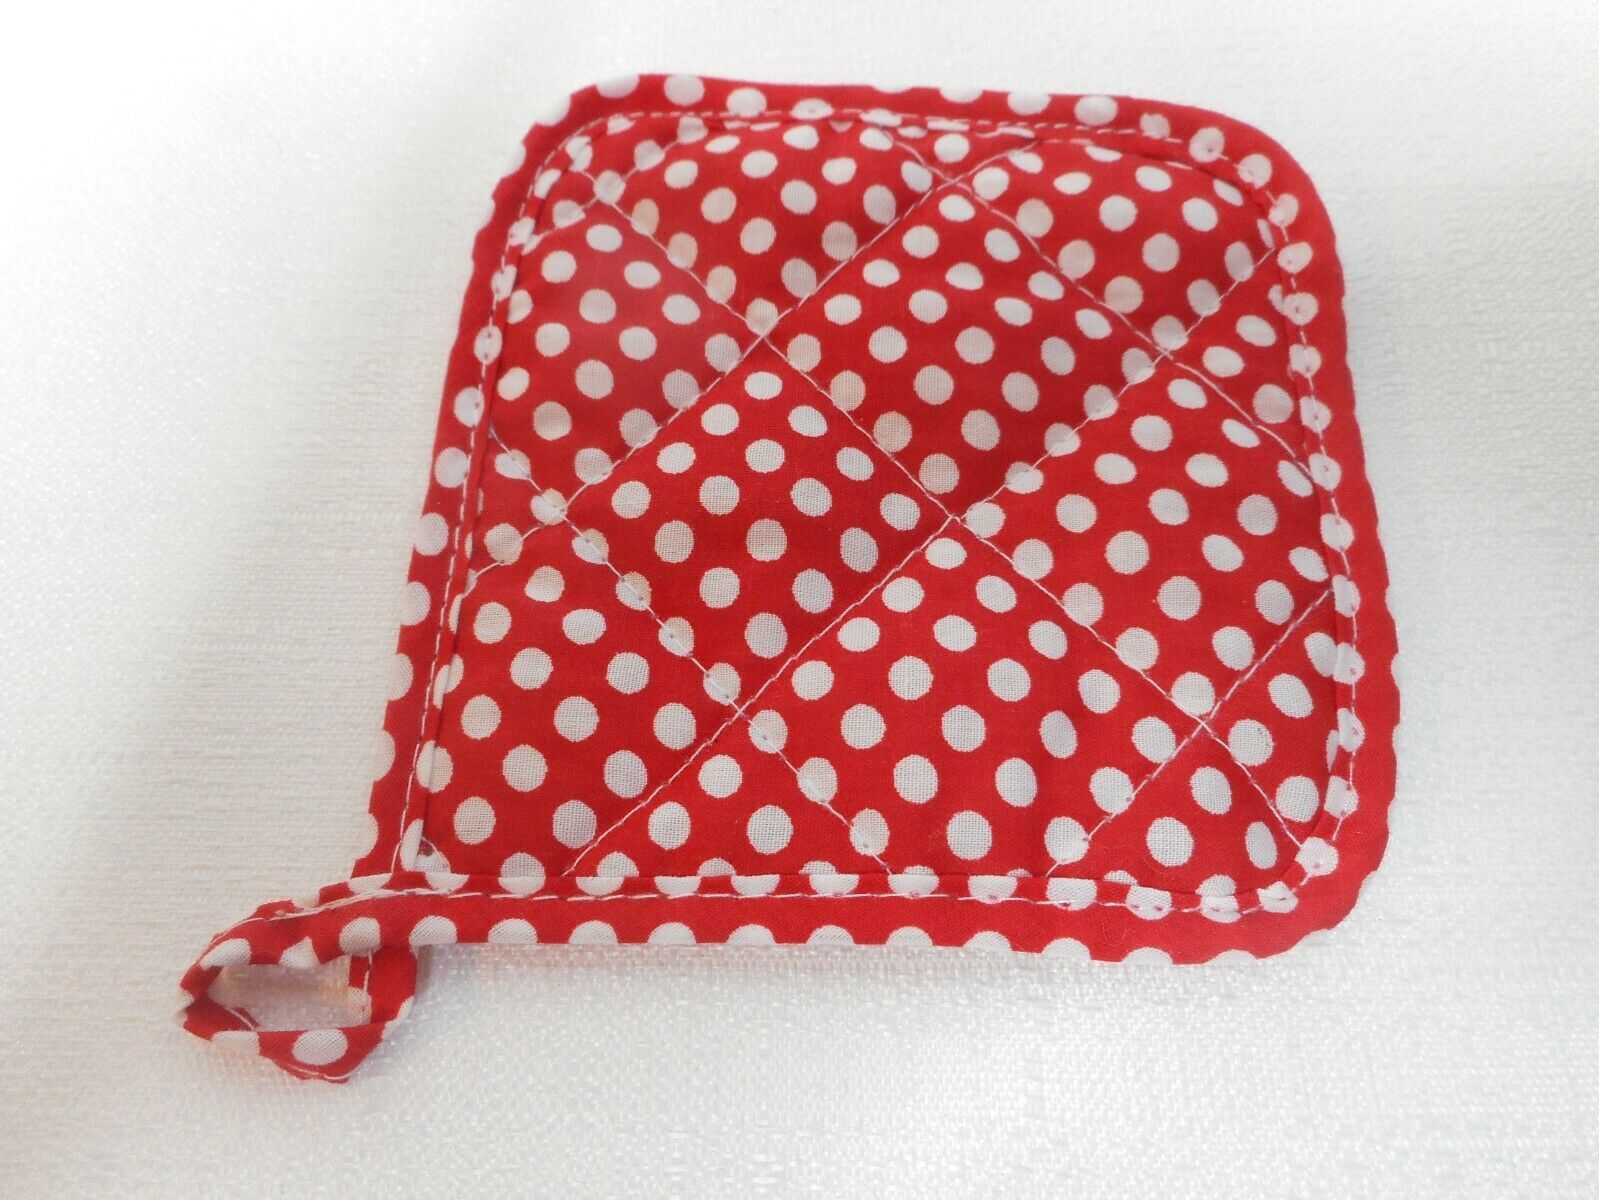 SCHYLLING TOYS Pretend Play Kitchen Oven Pot Holder Red/White Polka Dots Cloth - $8.99